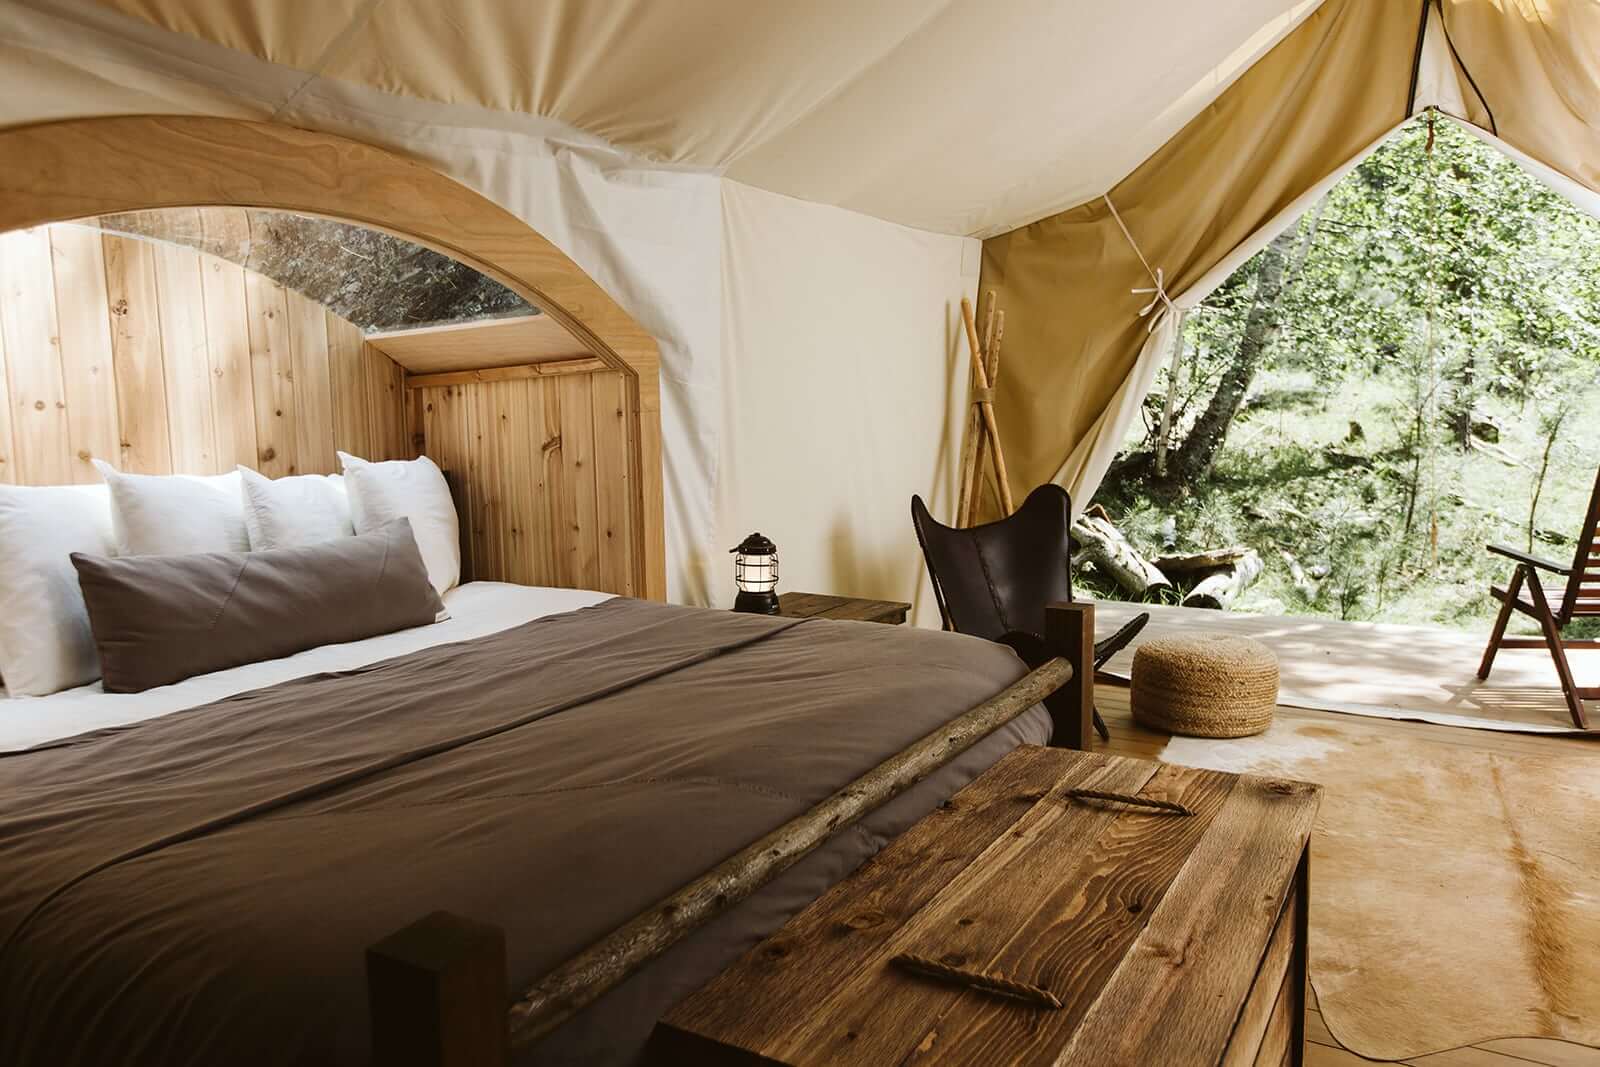 King Bed in Under Canvas Rushmore Glamping Tent with View of Forest